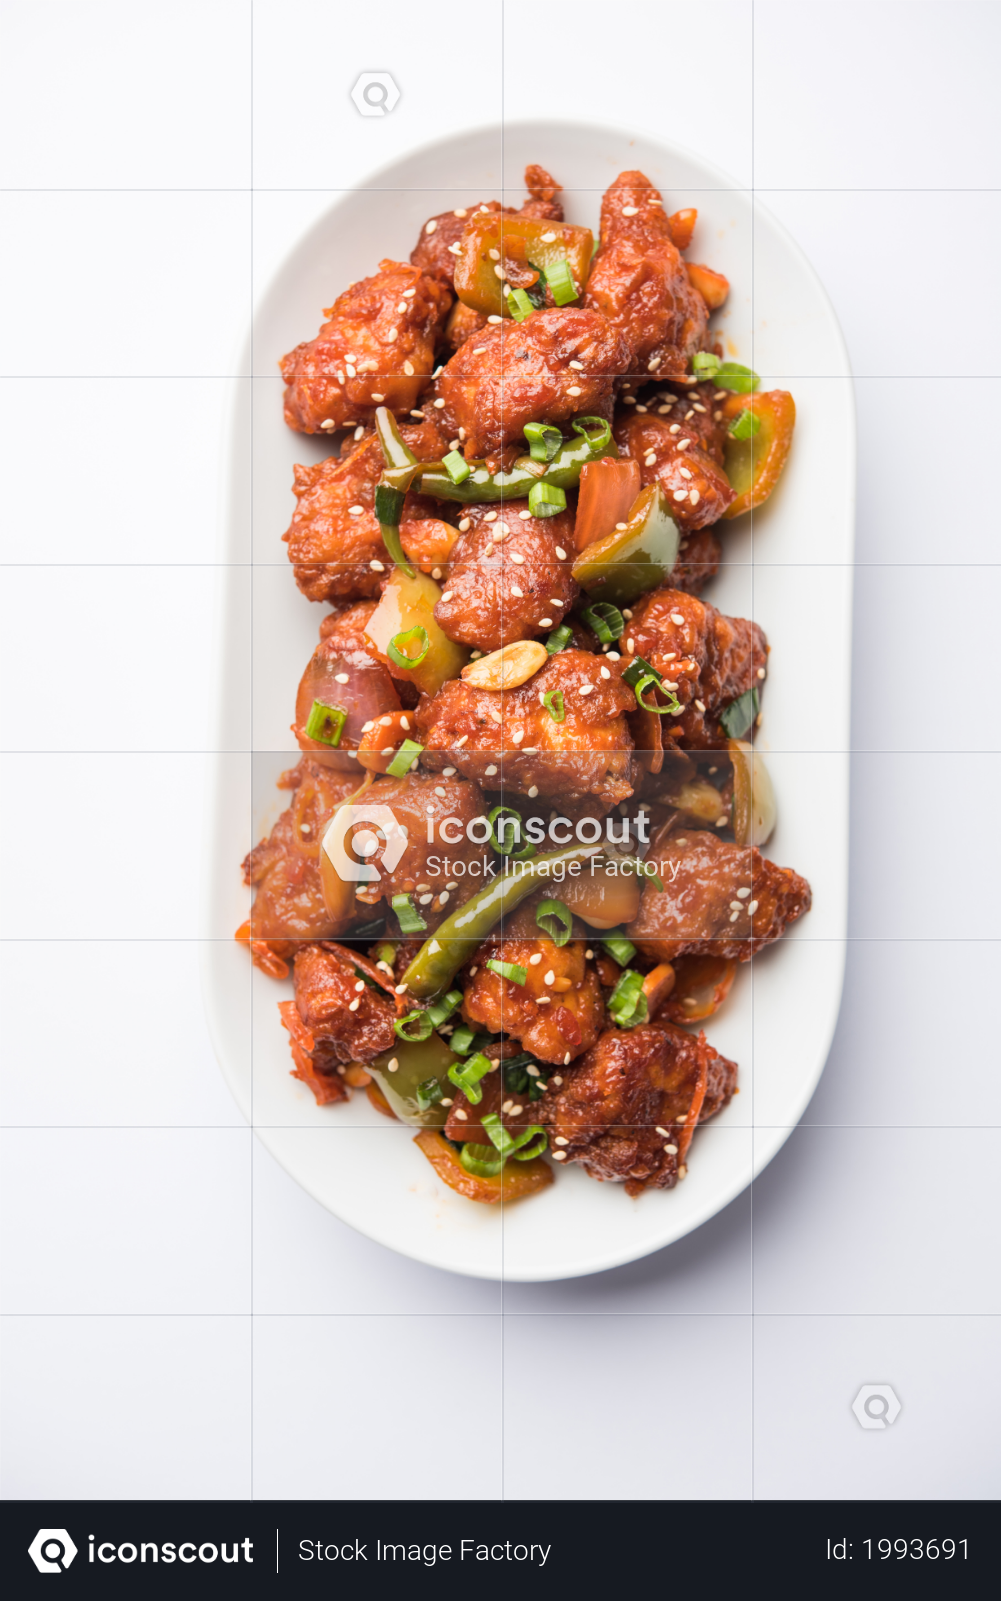 premium indian starter chili chicken recipe as spicy and delicious food photo download in png jpg format premium indian starter chili chicken recipe as spicy and delicious food photo download in png jpg format